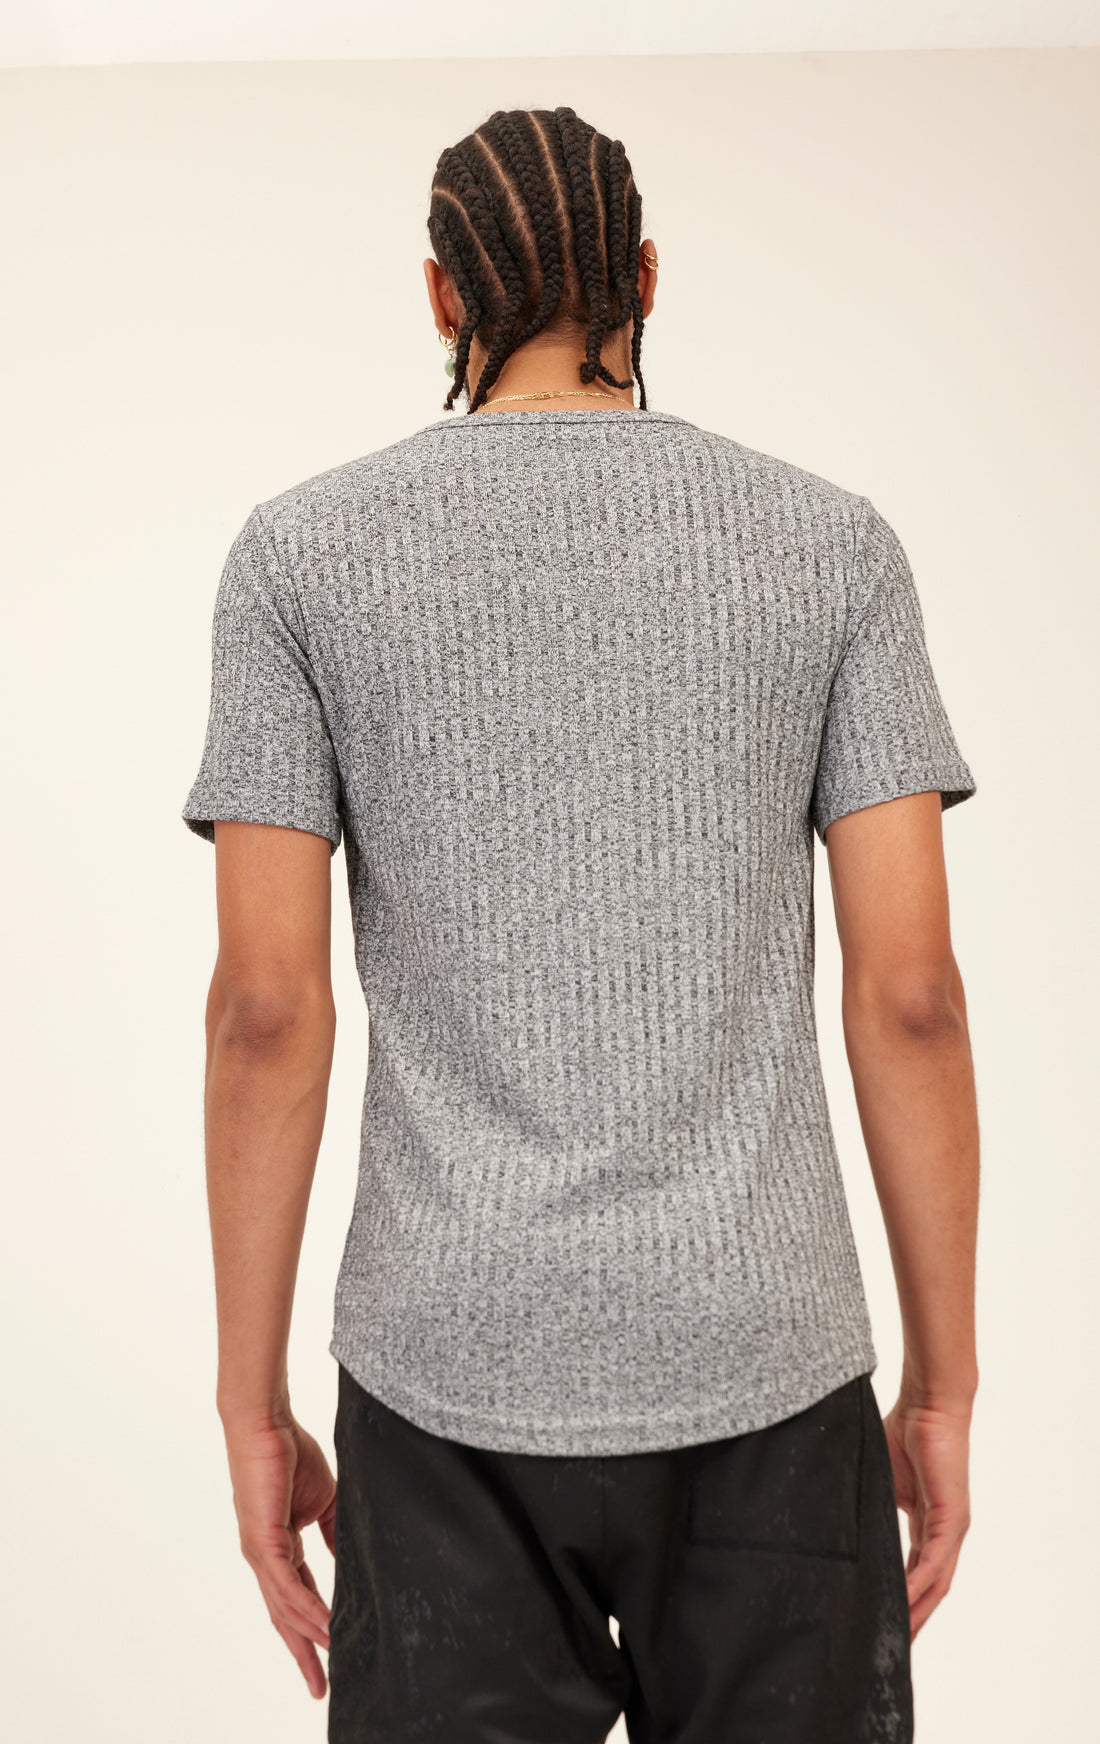 N° 6305 CREW NECK RIBBED MUSCLE KNIT TEE -GREY